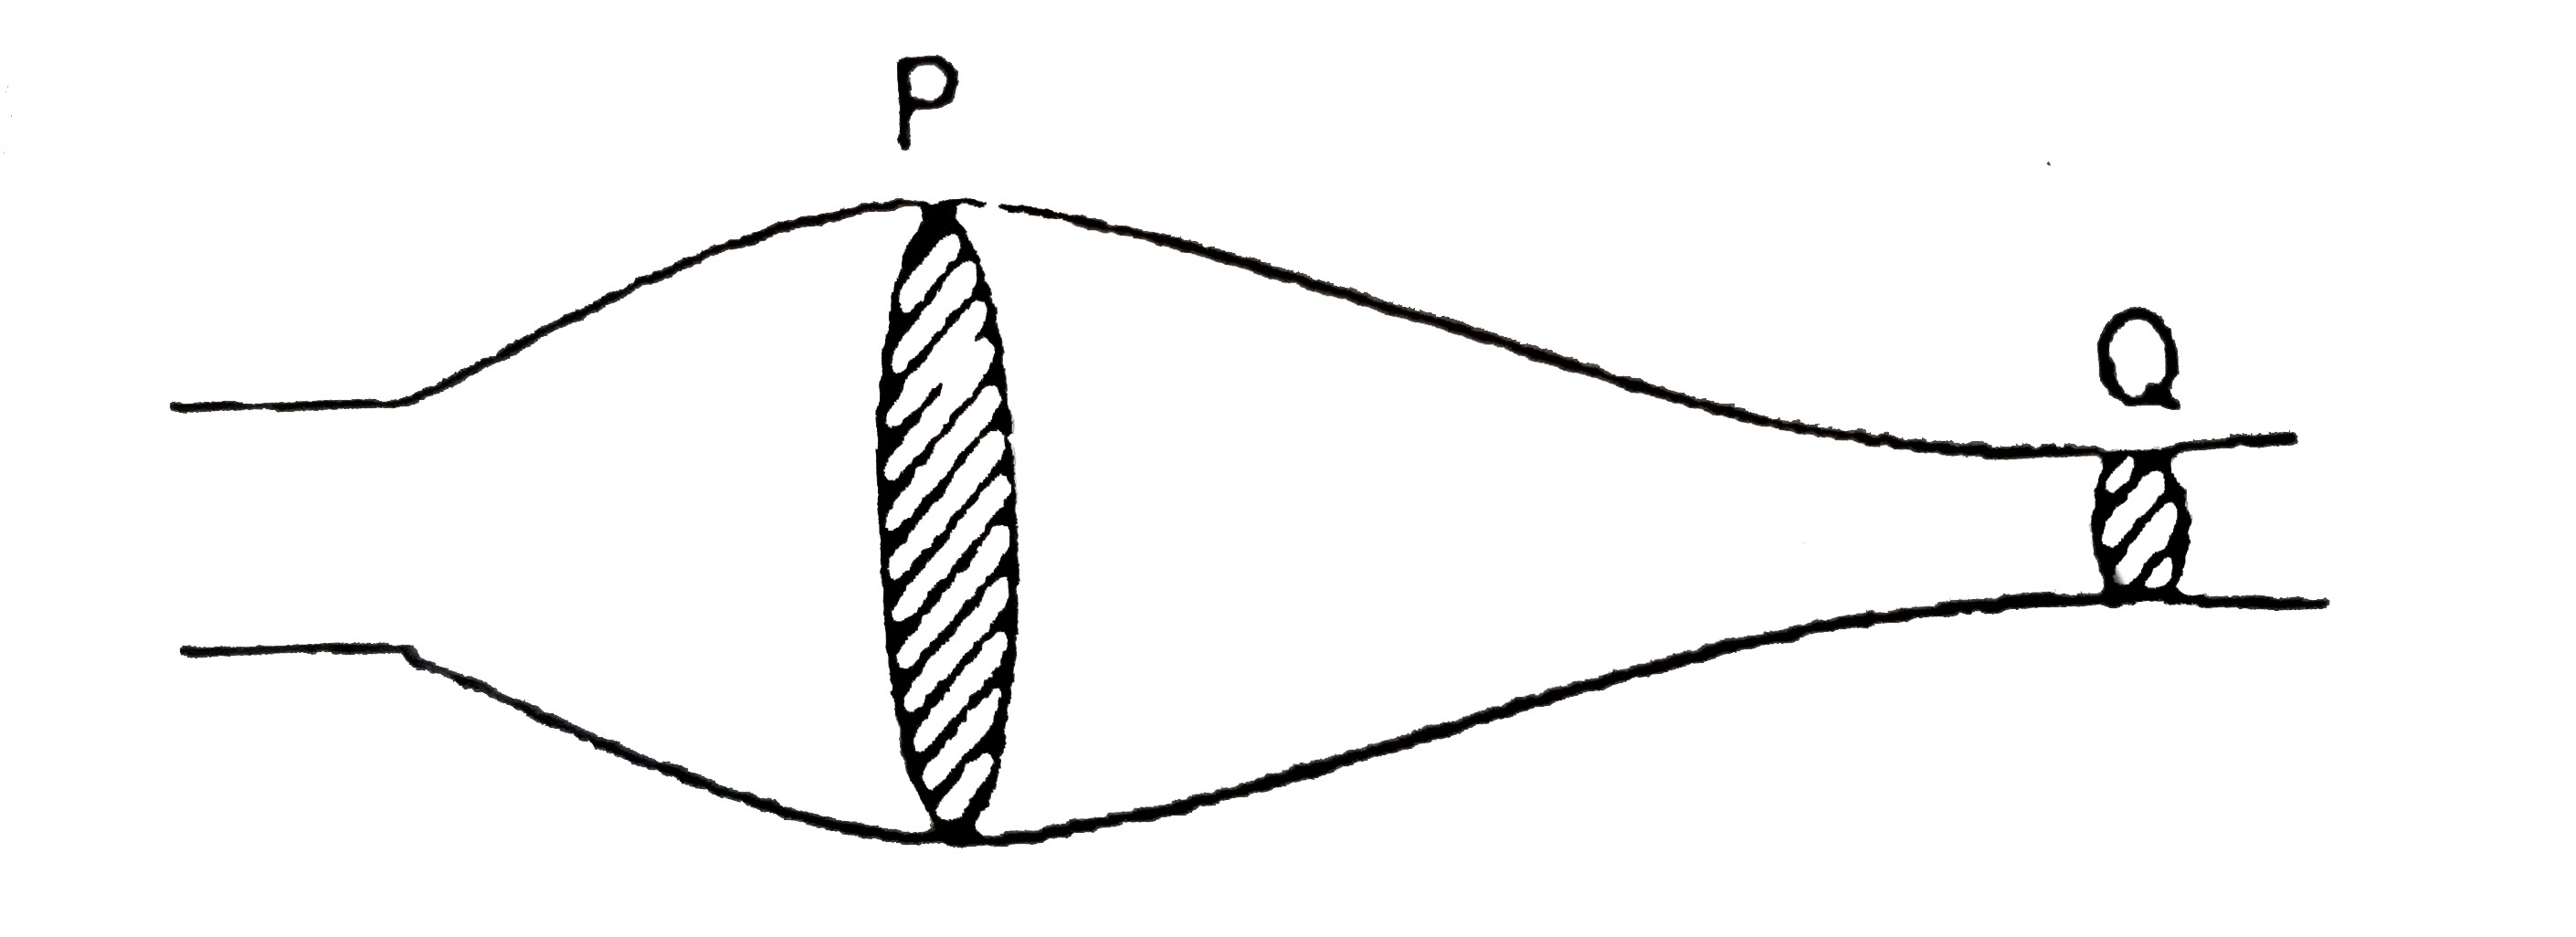 A source of constant potential difference is connected across a conductor having irregular cross section as shown.